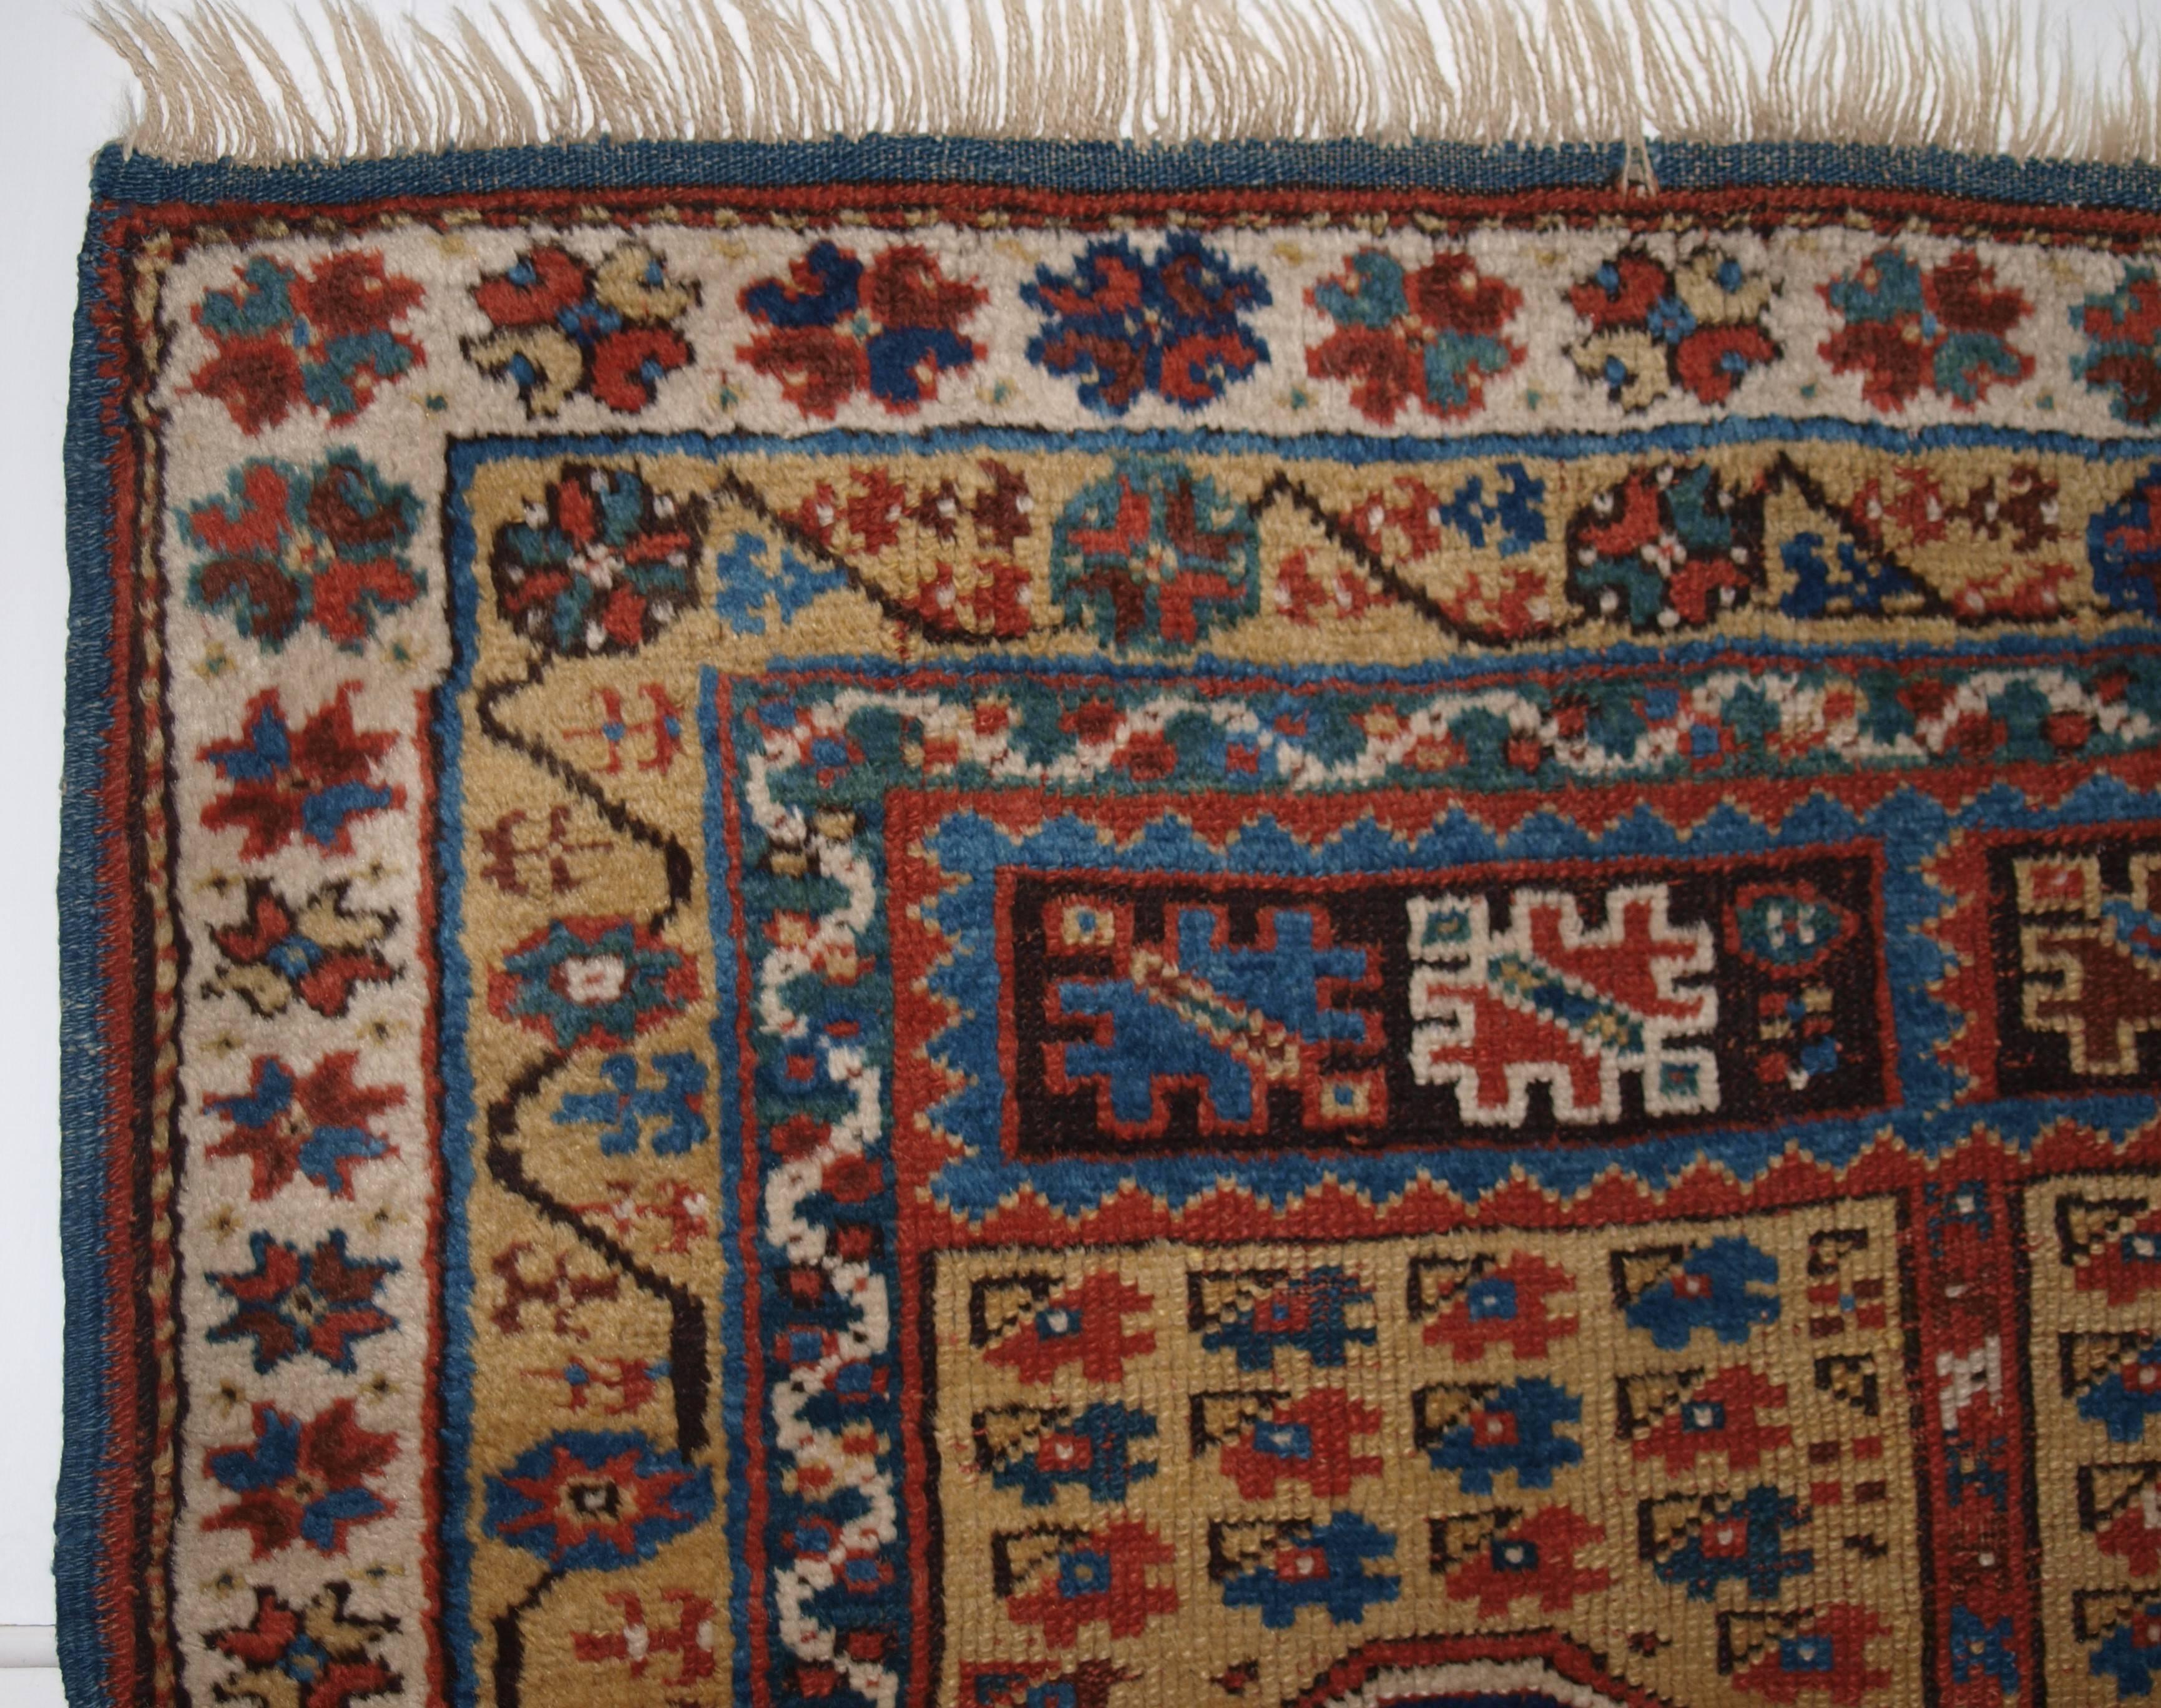 Antique Turkish Megri Prayer Rug with Yellow Field, Mid-19th Century In Excellent Condition For Sale In Moreton-in-Marsh, GB